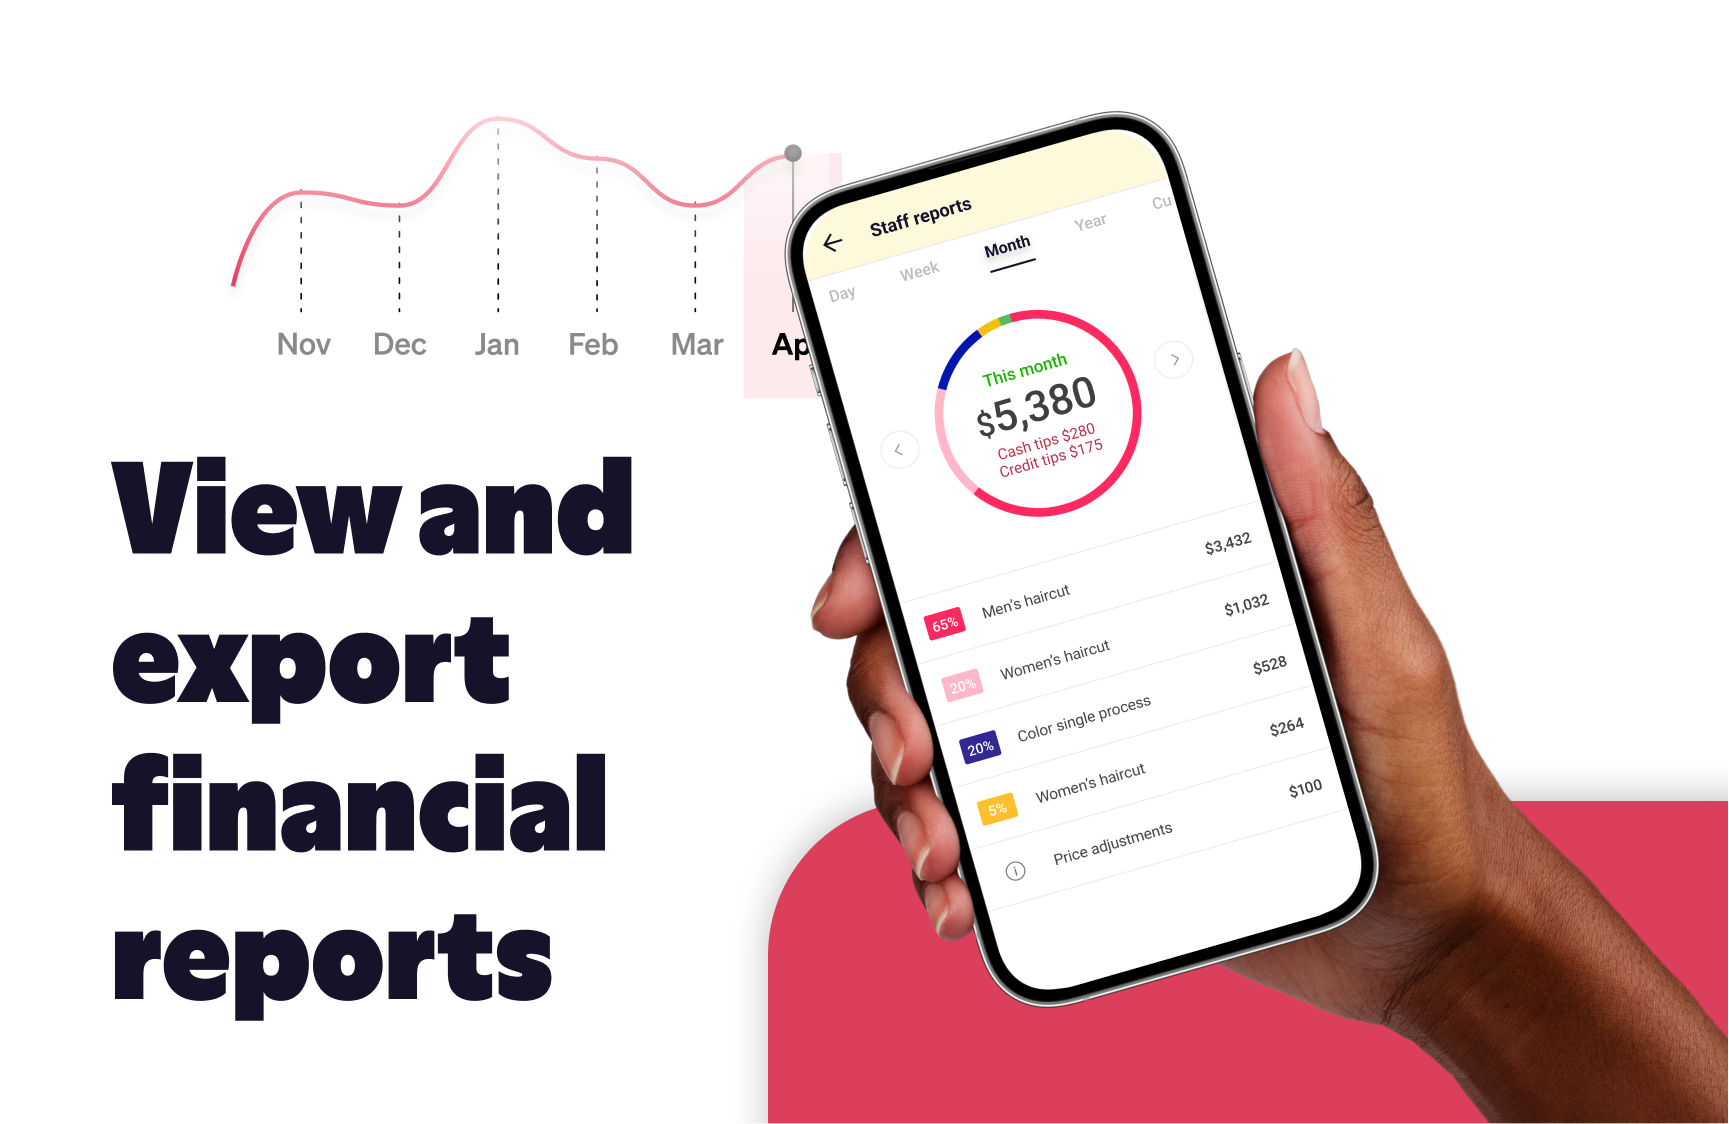 Financial reports based on appointments and services. Better understand how your business is doing. See your daily, weekly or monthly or yearly income reports with a single tap, and see what are you best selling services and your best clients.